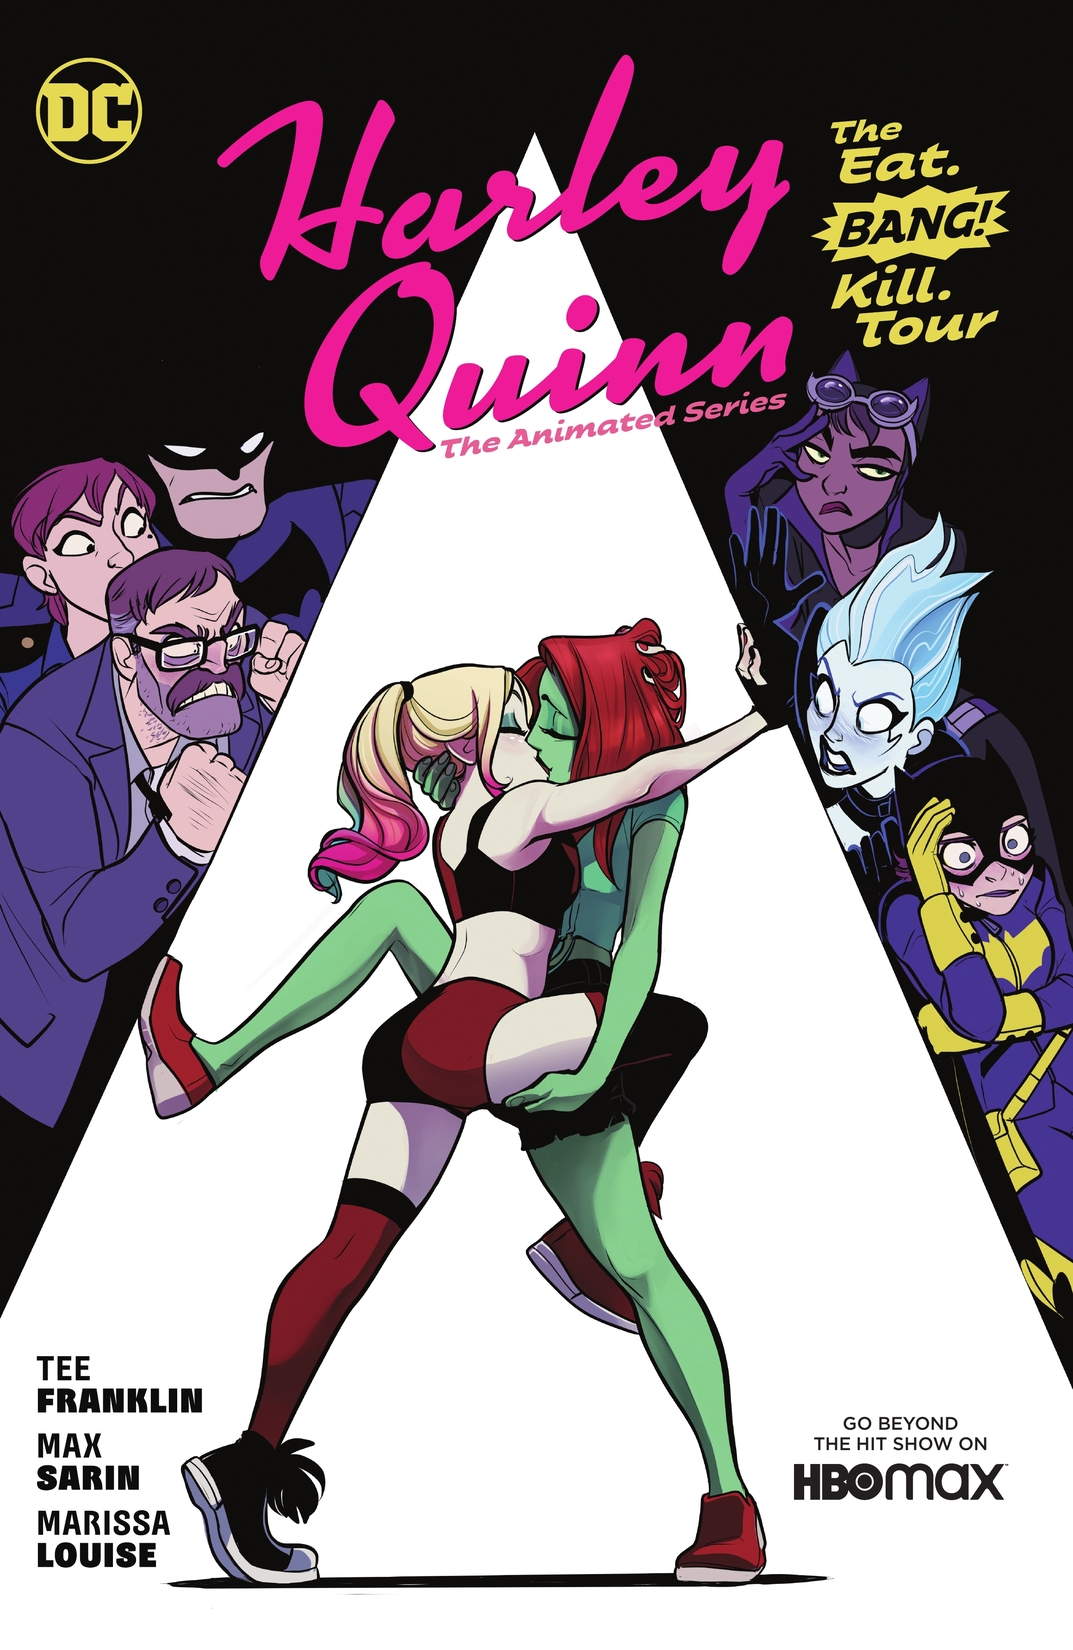 Harley Quinn: The Animated Series Vol. 1: The Eat. Bang! Kill Tour preview images